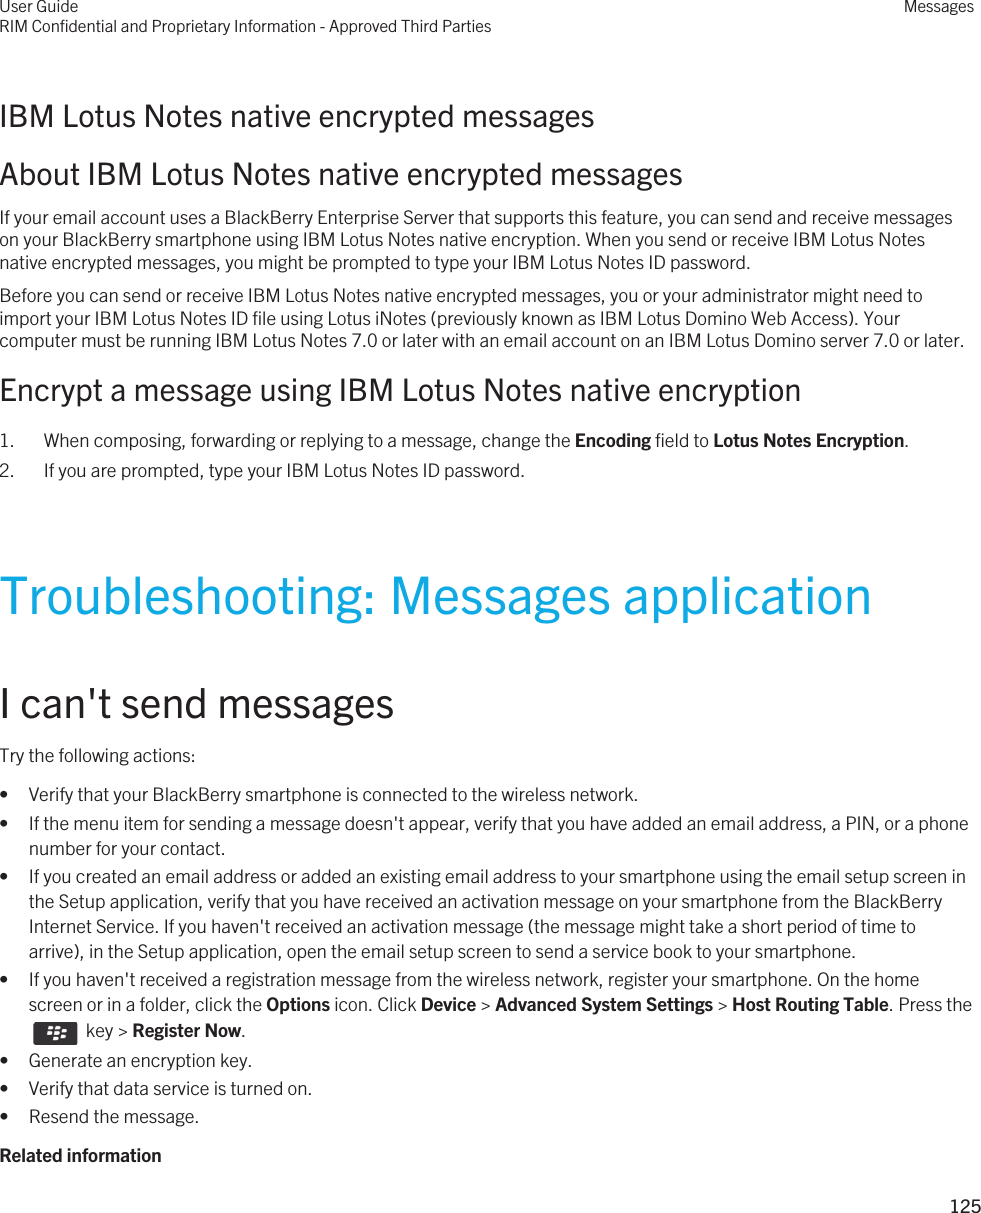 IBM Lotus Notes native encrypted messagesAbout IBM Lotus Notes native encrypted messagesIf your email account uses a BlackBerry Enterprise Server that supports this feature, you can send and receive messages on your BlackBerry smartphone using IBM Lotus Notes native encryption. When you send or receive IBM Lotus Notes native encrypted messages, you might be prompted to type your IBM Lotus Notes ID password.Before you can send or receive IBM Lotus Notes native encrypted messages, you or your administrator might need to import your IBM Lotus Notes ID file using Lotus iNotes (previously known as IBM Lotus Domino Web Access). Your computer must be running IBM Lotus Notes 7.0 or later with an email account on an IBM Lotus Domino server 7.0 or later.Encrypt a message using IBM Lotus Notes native encryption1. When composing, forwarding or replying to a message, change the Encoding field to Lotus Notes Encryption.2. If you are prompted, type your IBM Lotus Notes ID password.Troubleshooting: Messages applicationI can&apos;t send messagesTry the following actions:• Verify that your BlackBerry smartphone is connected to the wireless network.• If the menu item for sending a message doesn&apos;t appear, verify that you have added an email address, a PIN, or a phone number for your contact.• If you created an email address or added an existing email address to your smartphone using the email setup screen in the Setup application, verify that you have received an activation message on your smartphone from the BlackBerry Internet Service. If you haven&apos;t received an activation message (the message might take a short period of time to arrive), in the Setup application, open the email setup screen to send a service book to your smartphone.• If you haven&apos;t received a registration message from the wireless network, register your smartphone. On the home screen or in a folder, click the Options icon. Click Device &gt; Advanced System Settings &gt; Host Routing Table. Press the   key &gt; Register Now.• Generate an encryption key.• Verify that data service is turned on.• Resend the message.Related informationUser GuideRIM Confidential and Proprietary Information - Approved Third PartiesMessages125 